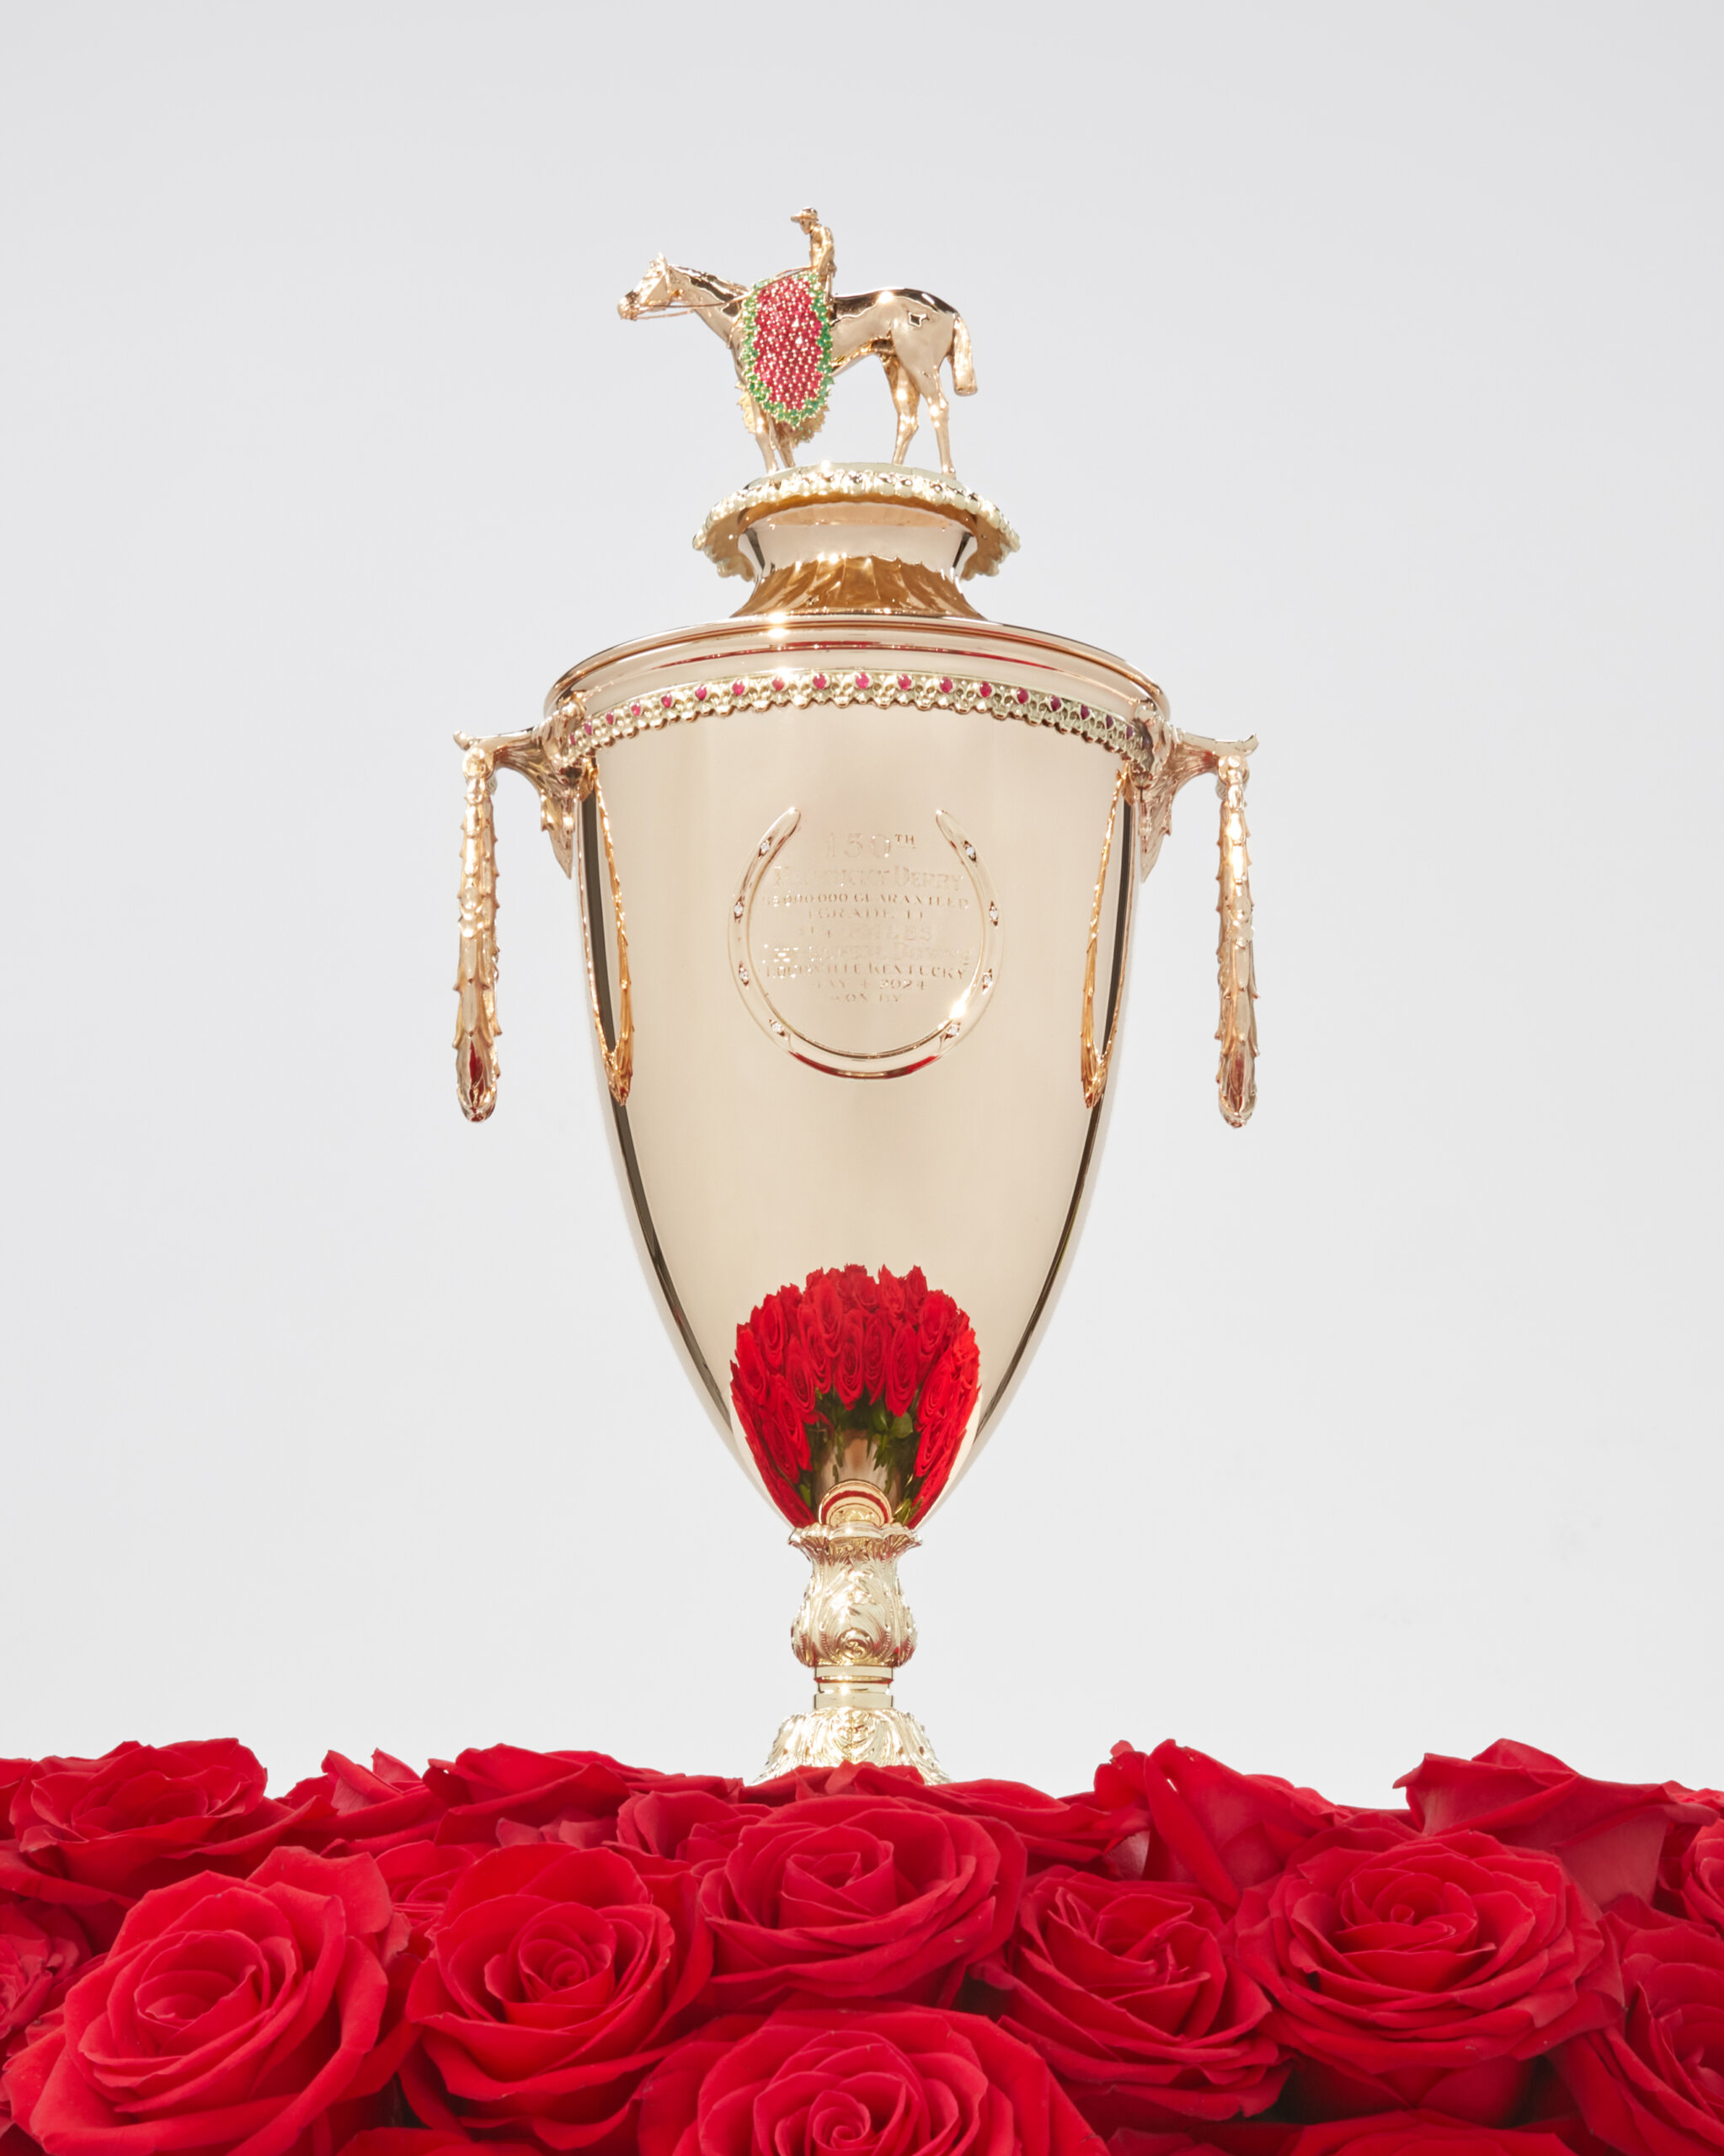 Special Kentucky Derby 150 Gold Trophy Unveiled News Kentucky Derby